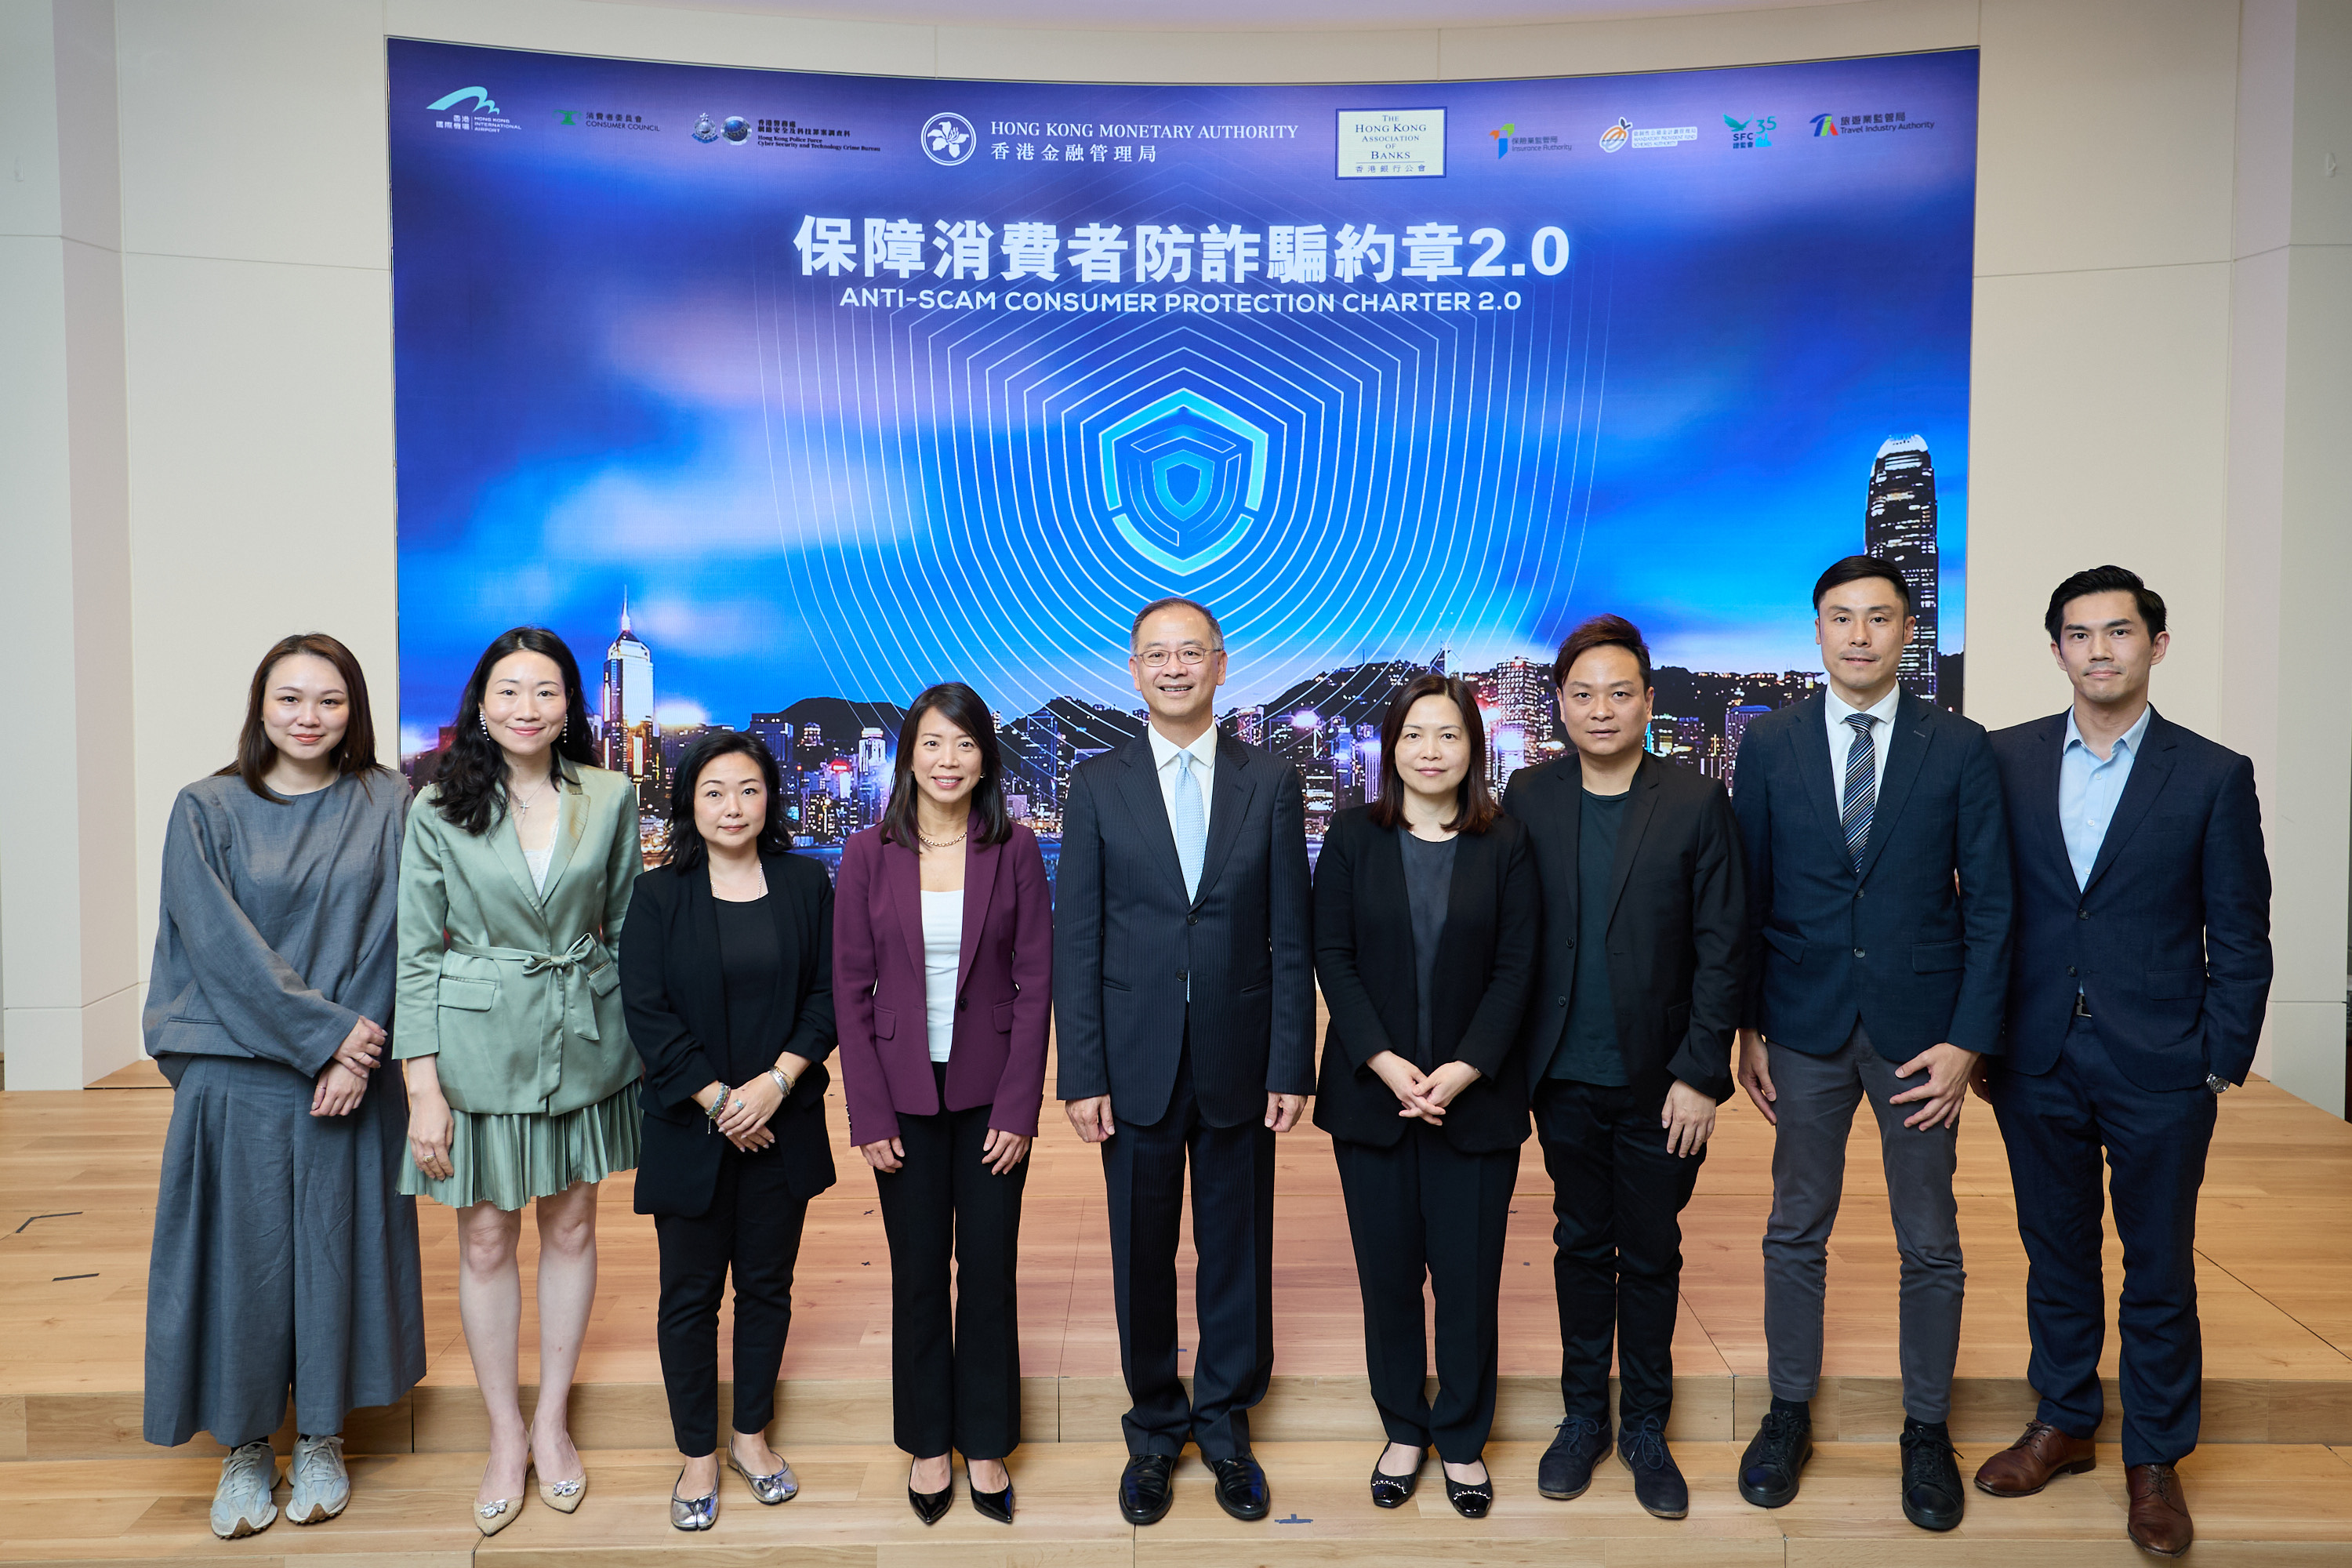 Mr Eddie Yue, Chief Executive of the Hong Kong Monetary Authority (fifth from left); Ms Luanne Lim, Chairman of the Hong Kong Association of Banks and Chief Executive Officer, Hong Kong, HSBC (fourth from left); and representatives of merchant institutions attend the event to support the Anti-Scam Consumer Protection Charter 2.0.